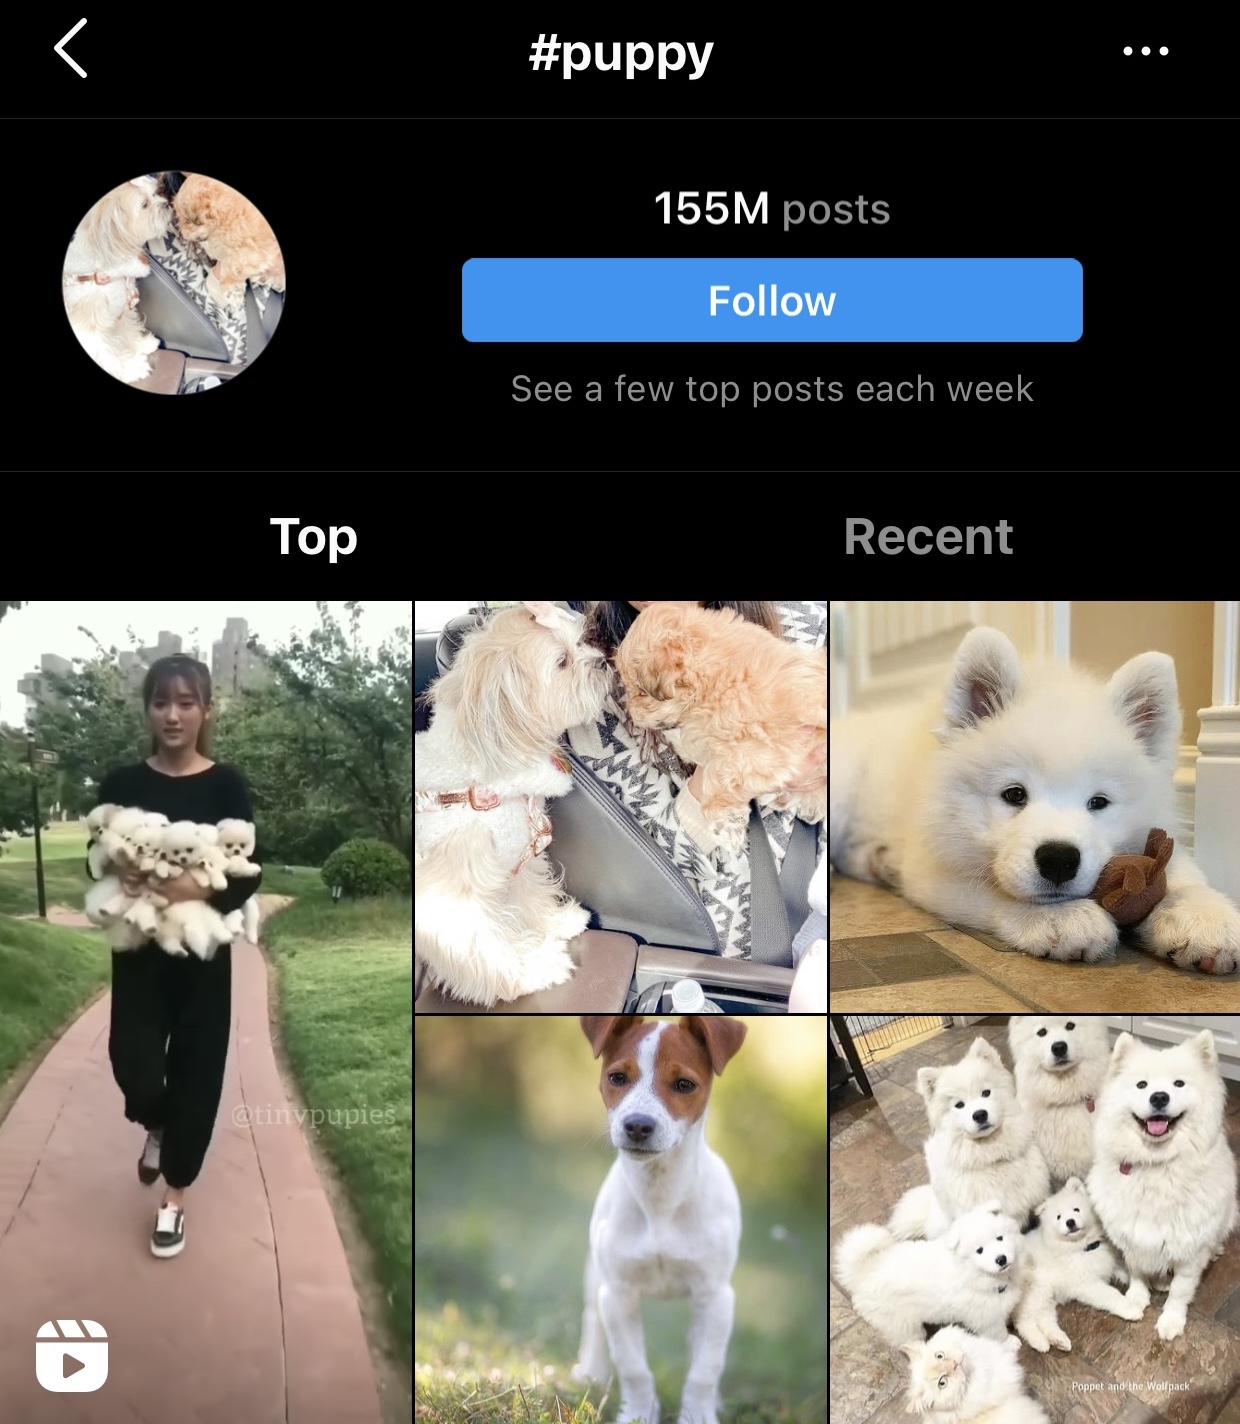 Search results for hashtag #puppy on Instagram.